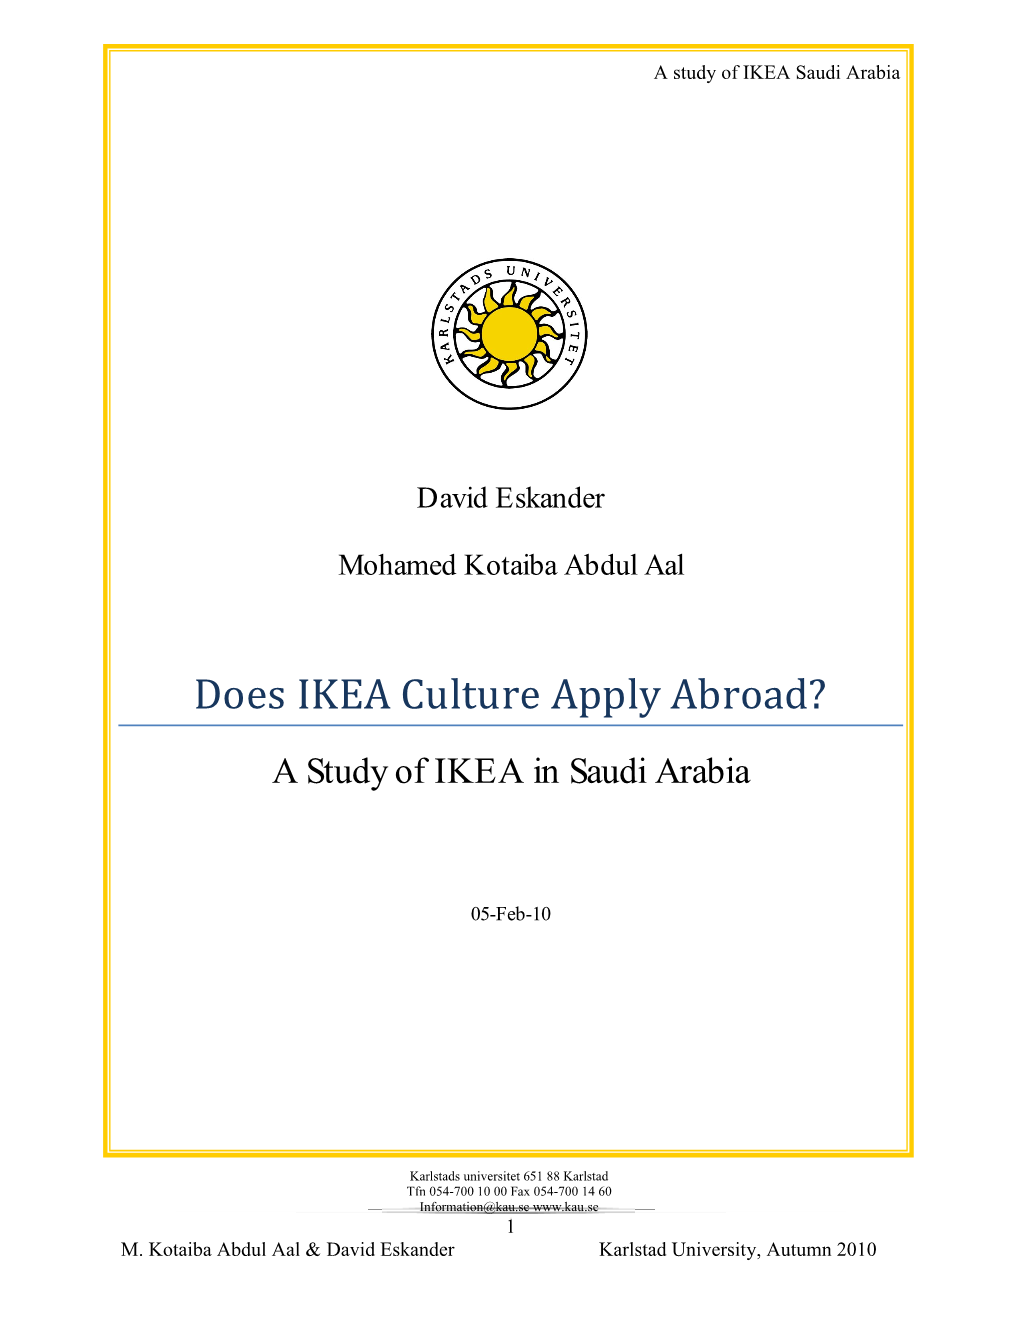 Does IKEA Culture Apply Abroad?